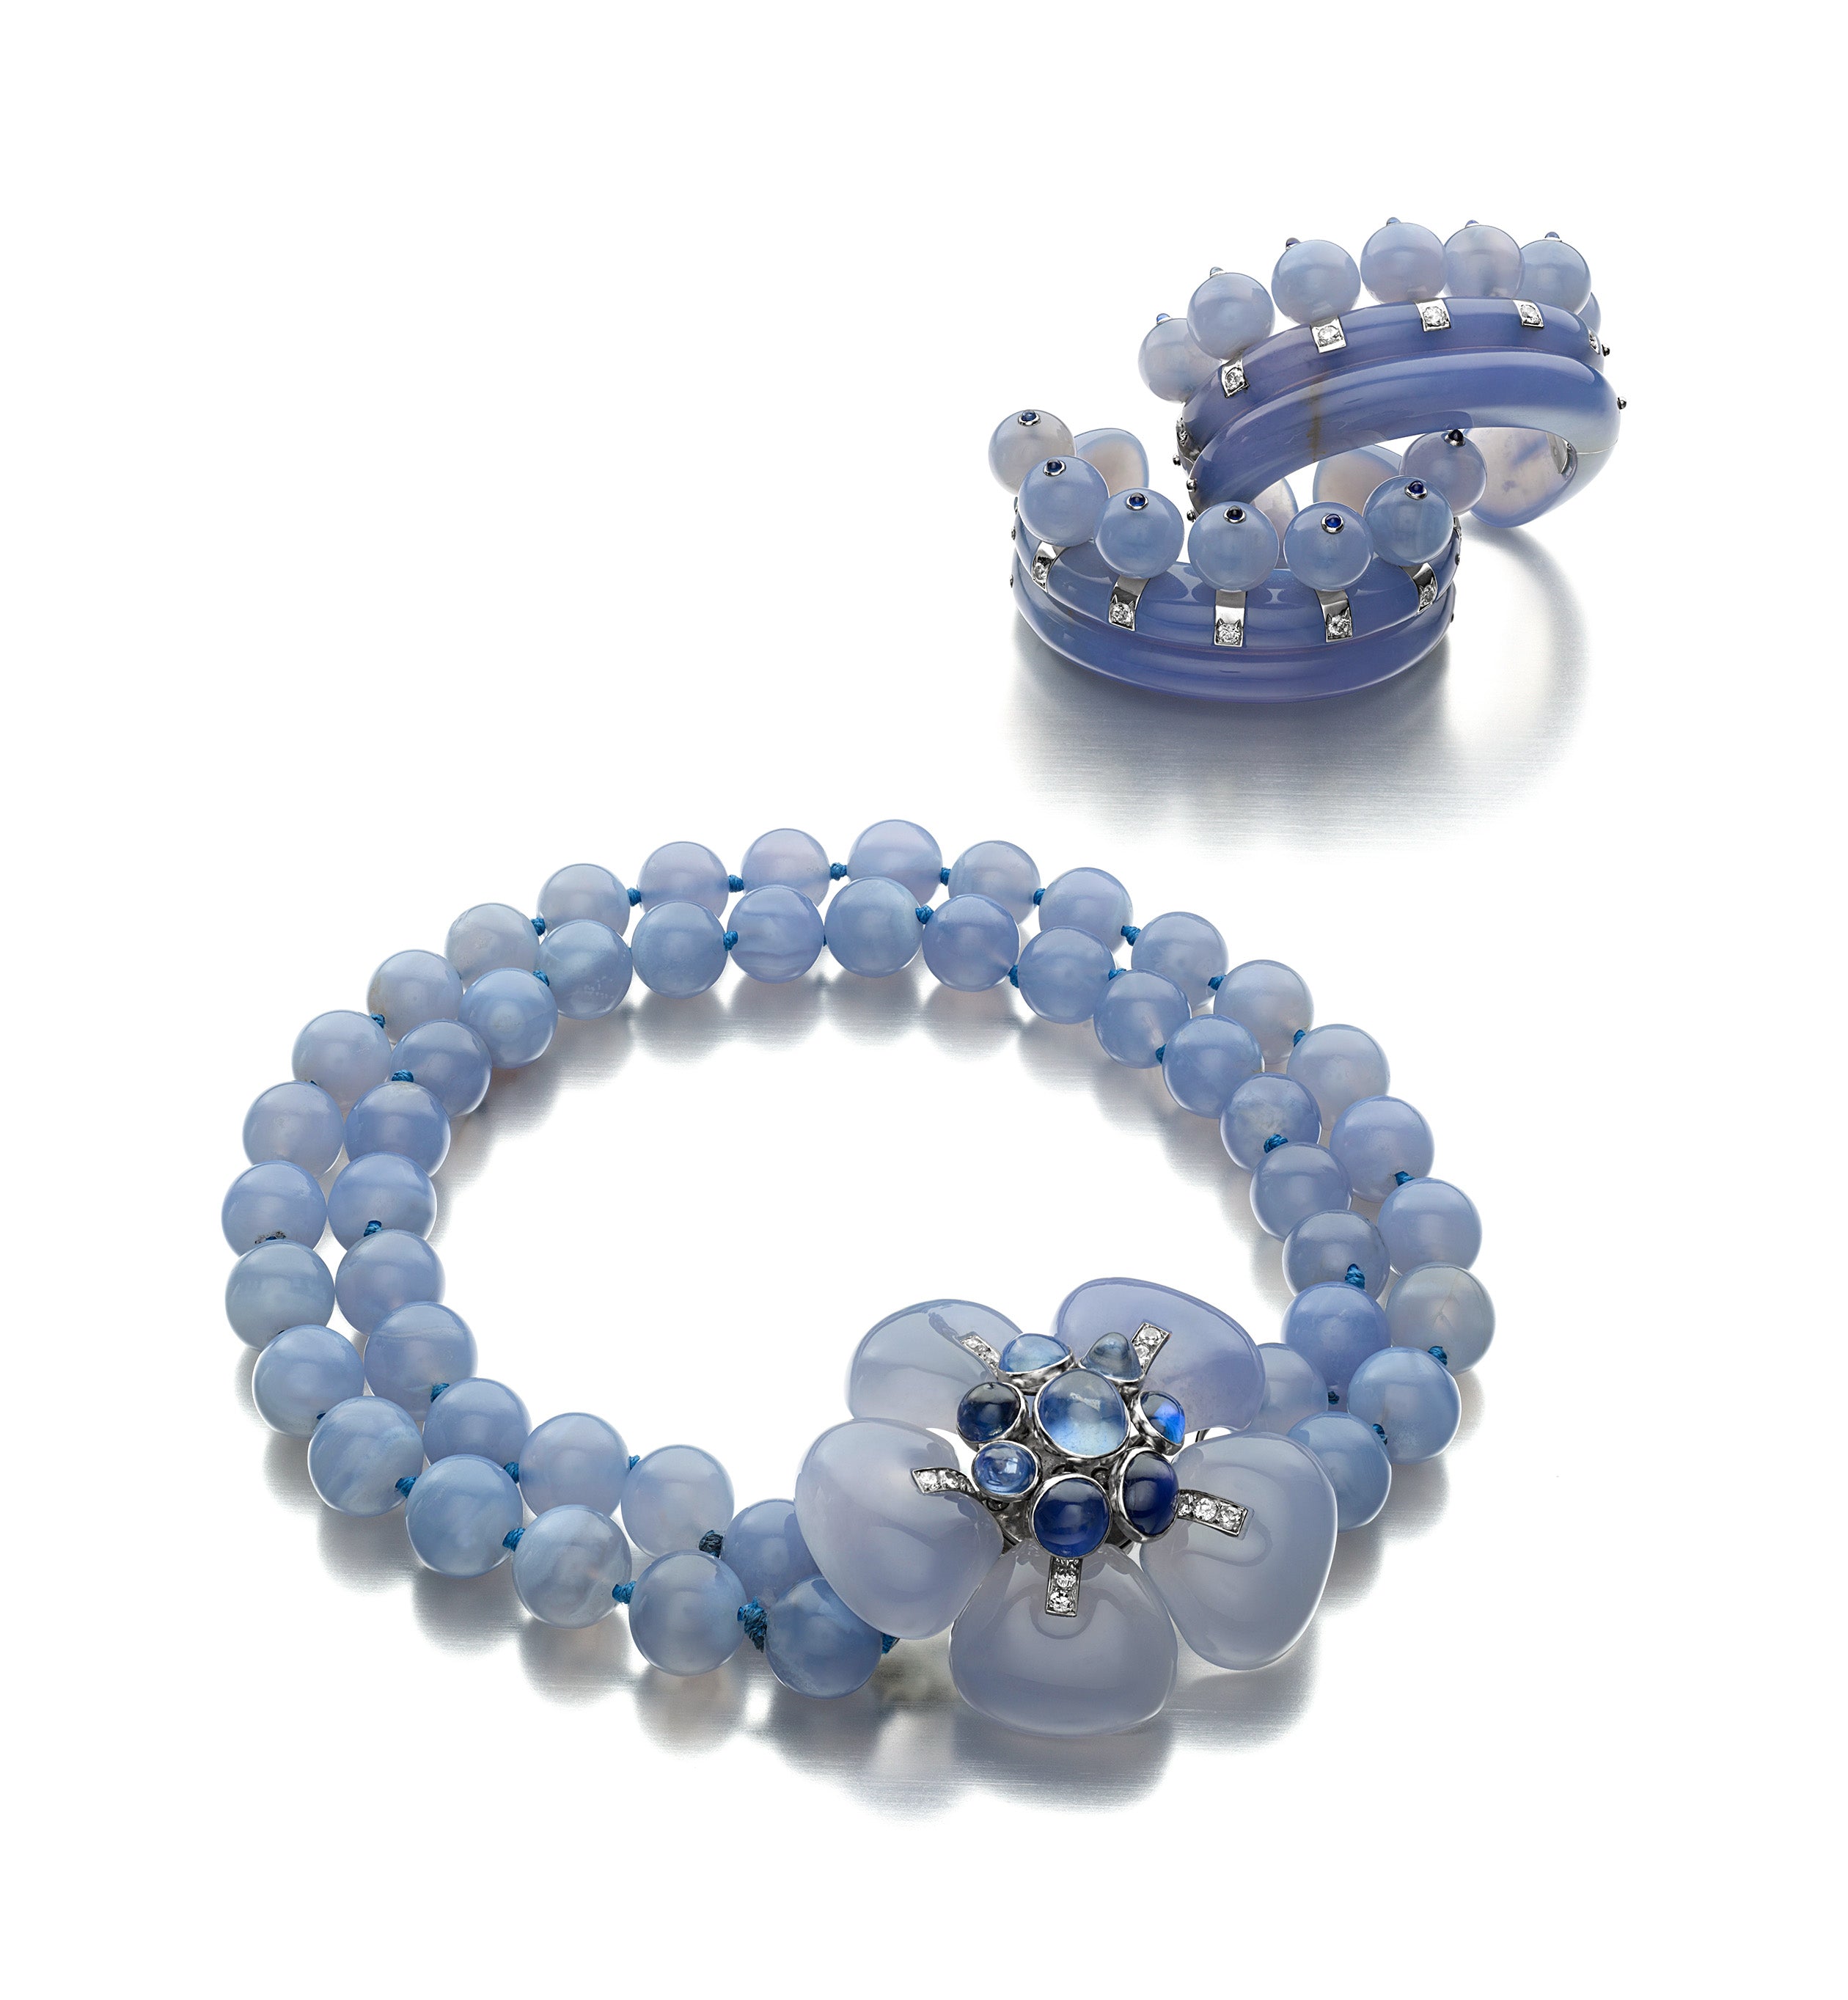 THE  DUCHESS  OF  WINDSOR  SUITE:  AN  ART  MODERNE  BLUE  CHALCEDONY,  SAPPHIRE, AND  DIAMOND  SUITE  OF  JEWELRY  BY  SUZANNE  BELPERRON,  PARIS,  CIRCA  1935